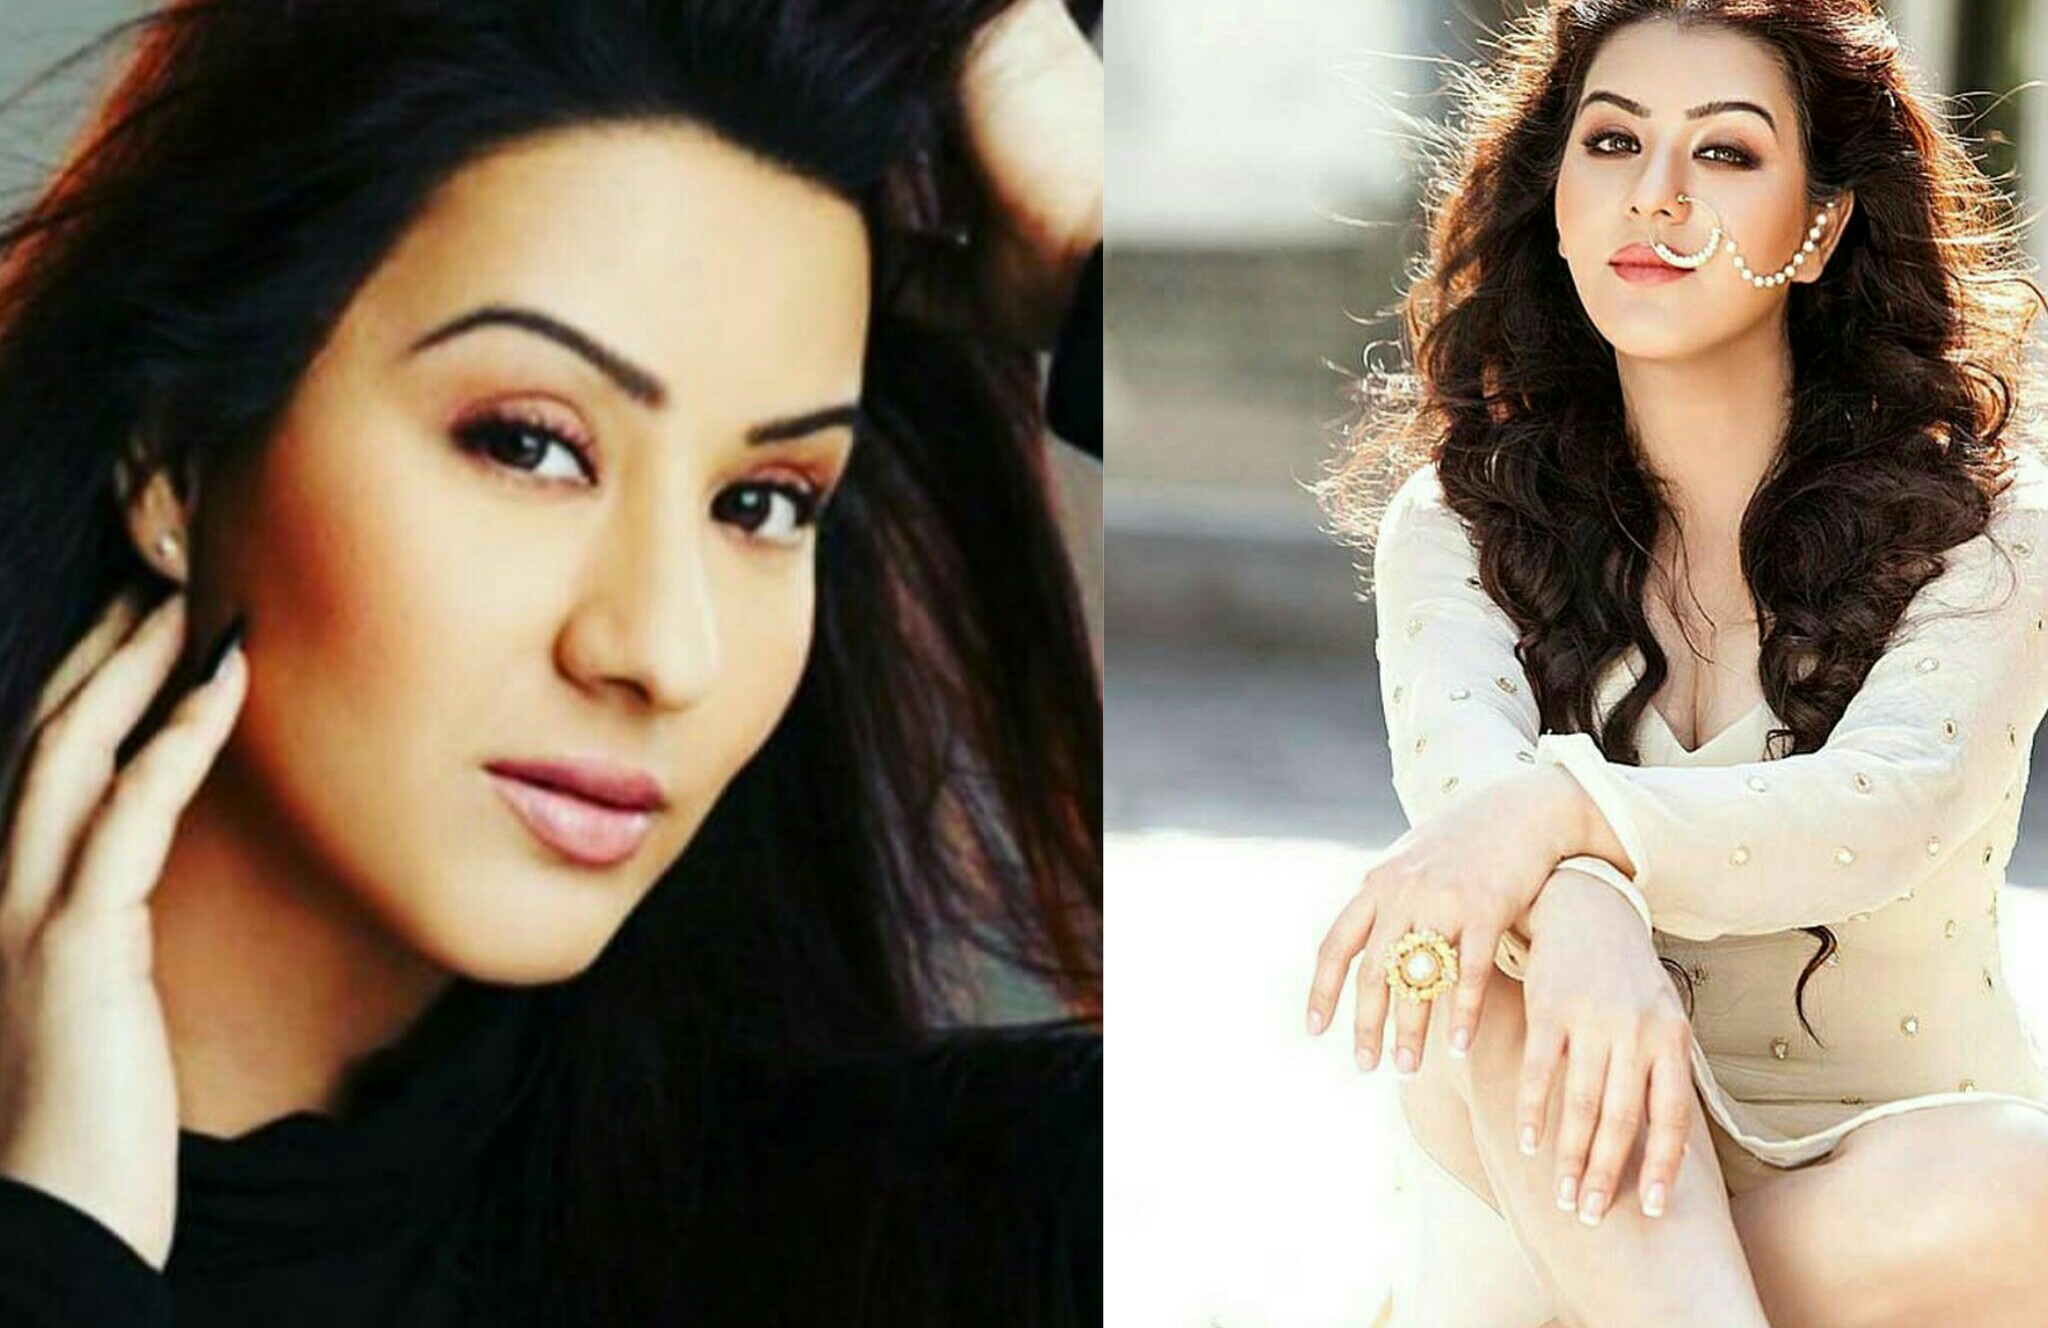 10 Unseen Pictures of Shilpa Shinde, And You’ll Be Shocked To See Her Transformation!